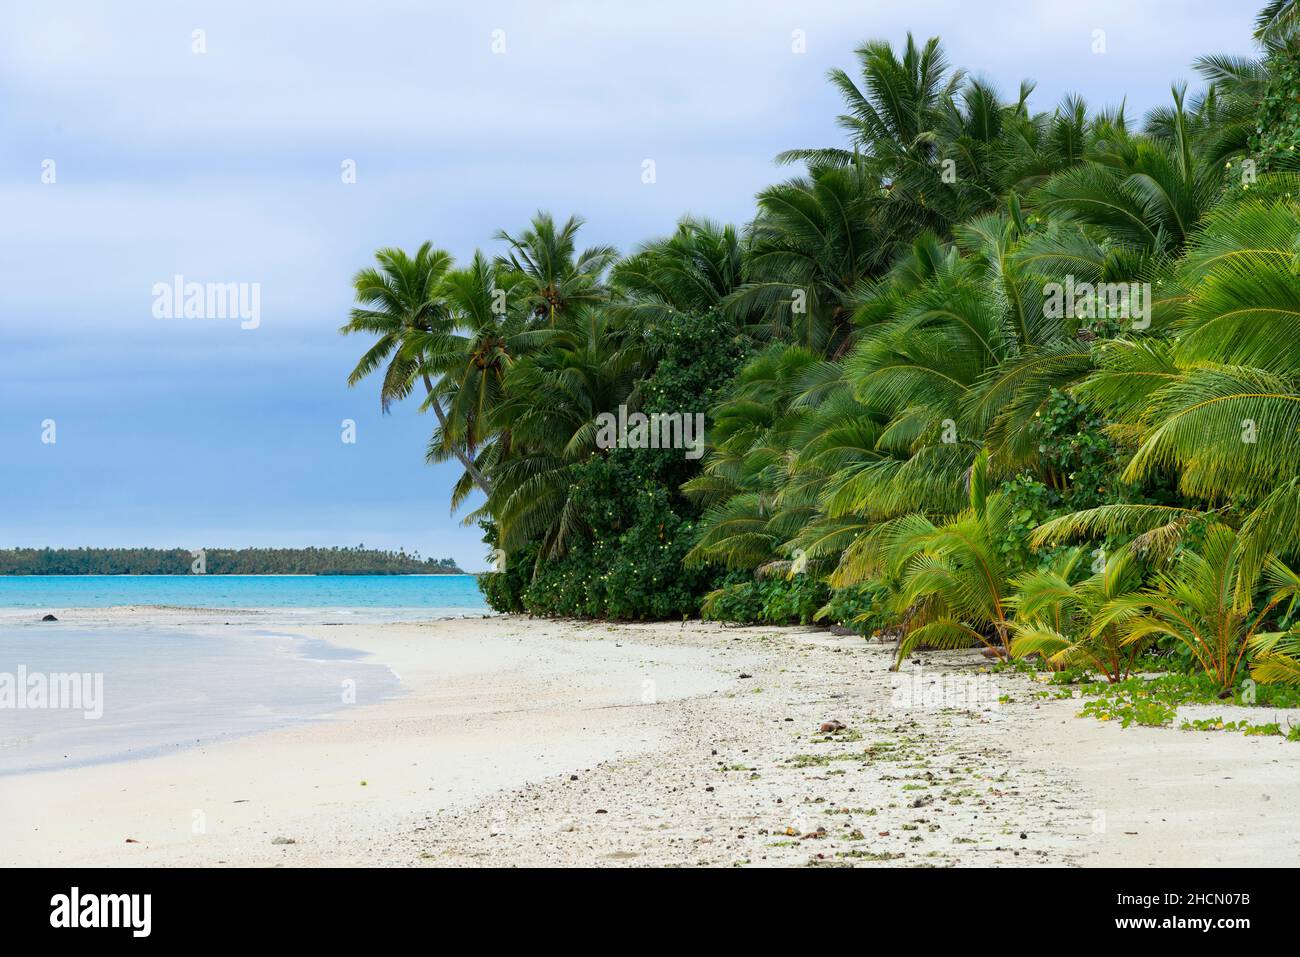 The beautiful beach and turquoise sea on One Foot Island a short distance from Aitutaki one of the Cook Islands, South Pacific Stock Photo